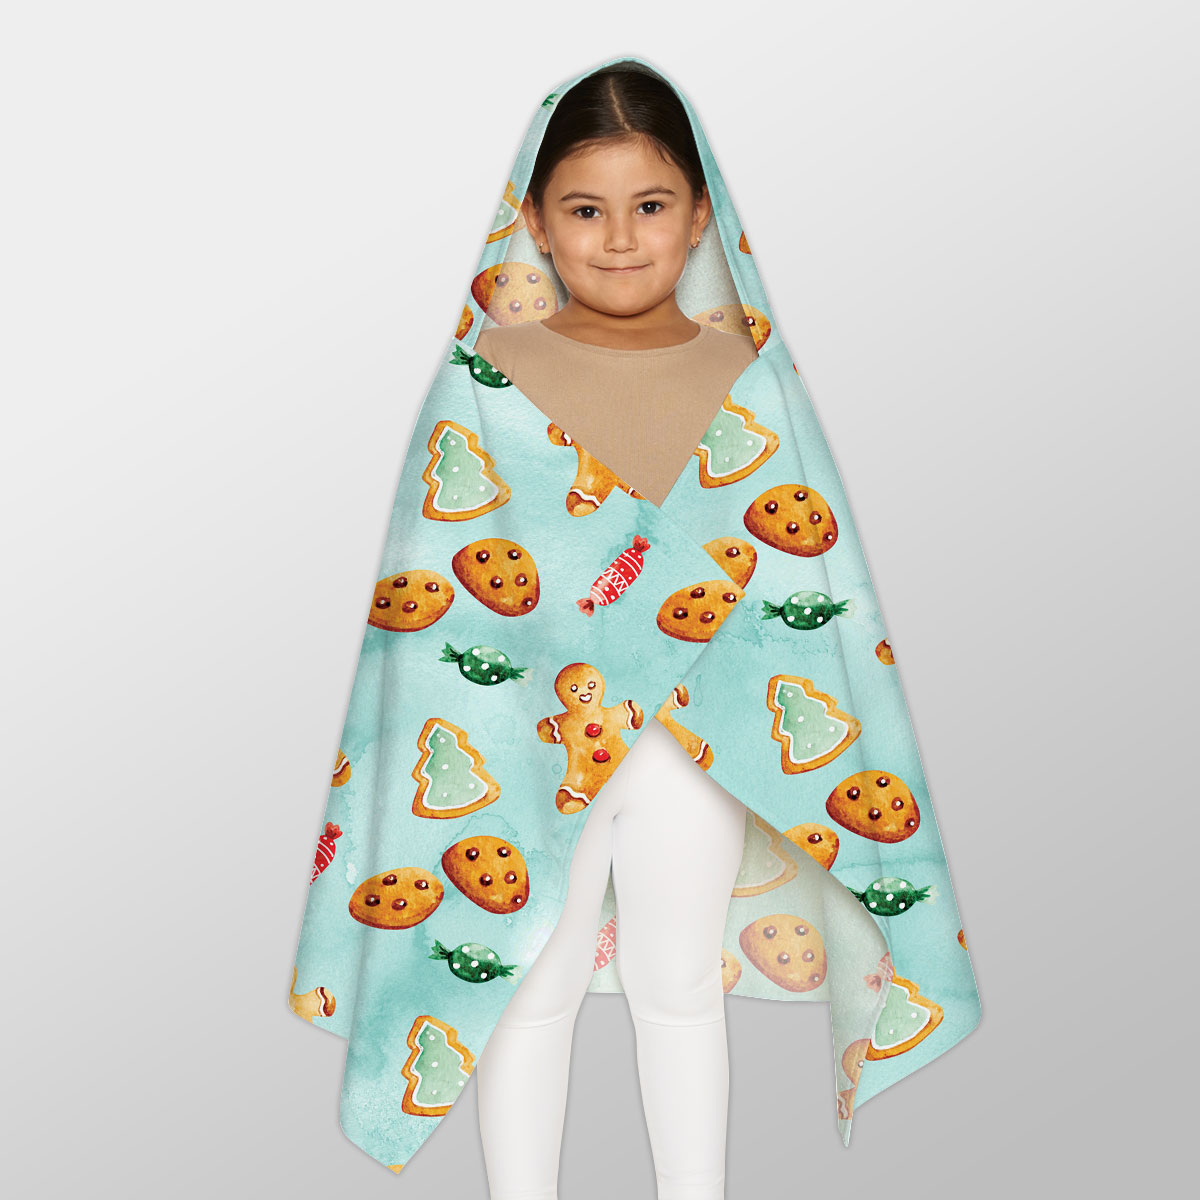 Gingerbread, Christmas Candy, Gingerbread Man Cookies Youth Hooded Towel